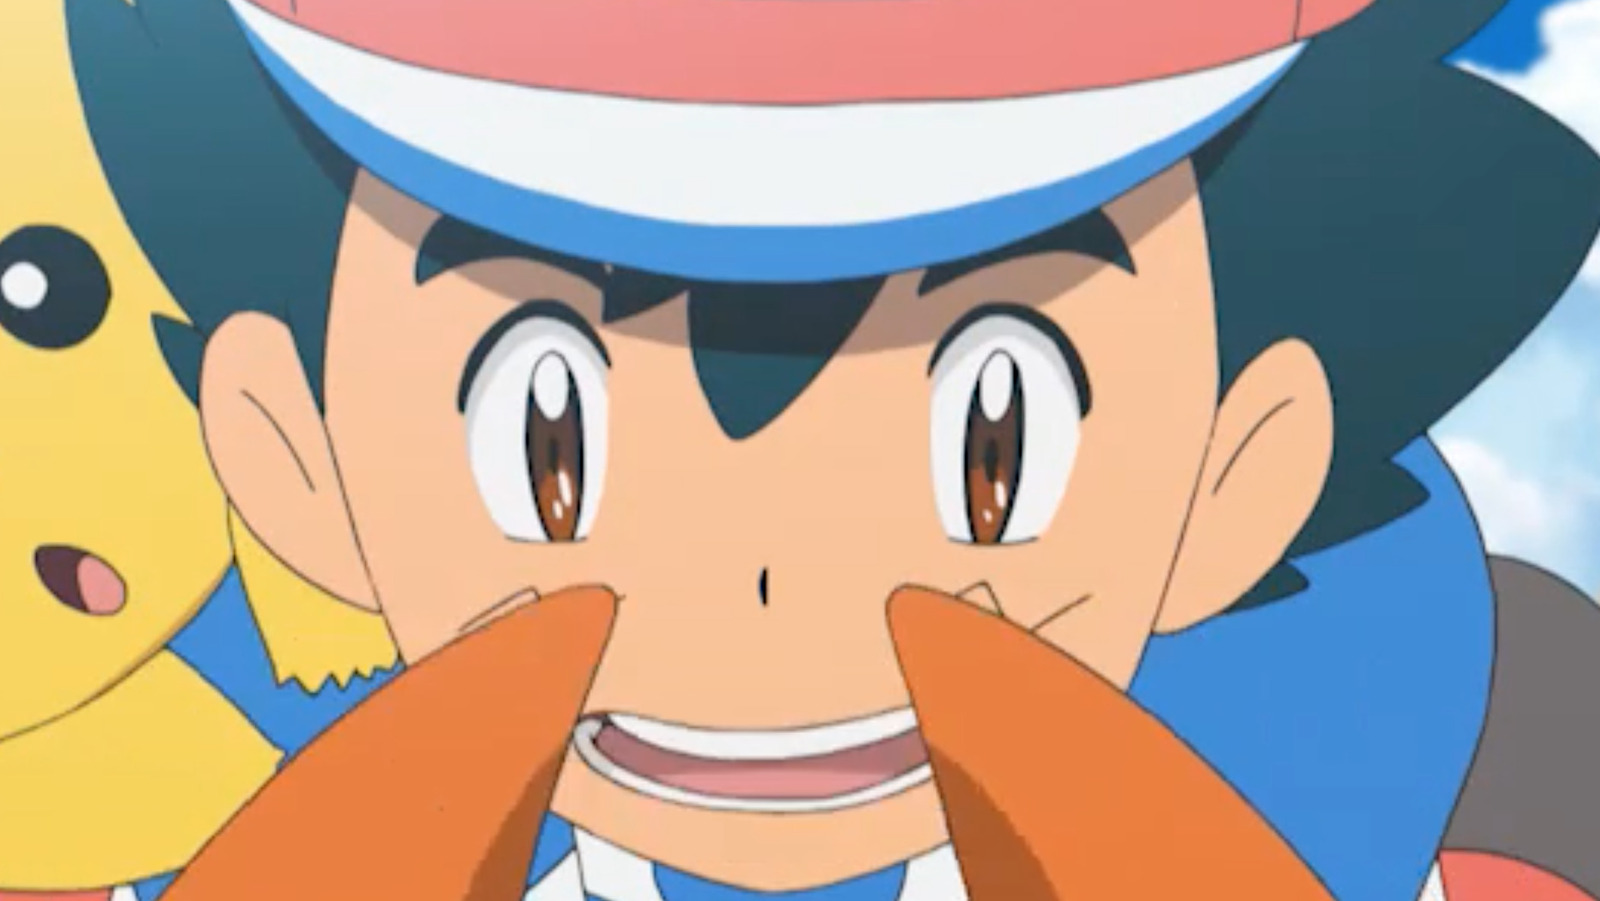 The Original Ending For The Pokémon Anime Was Incredibly Depressing